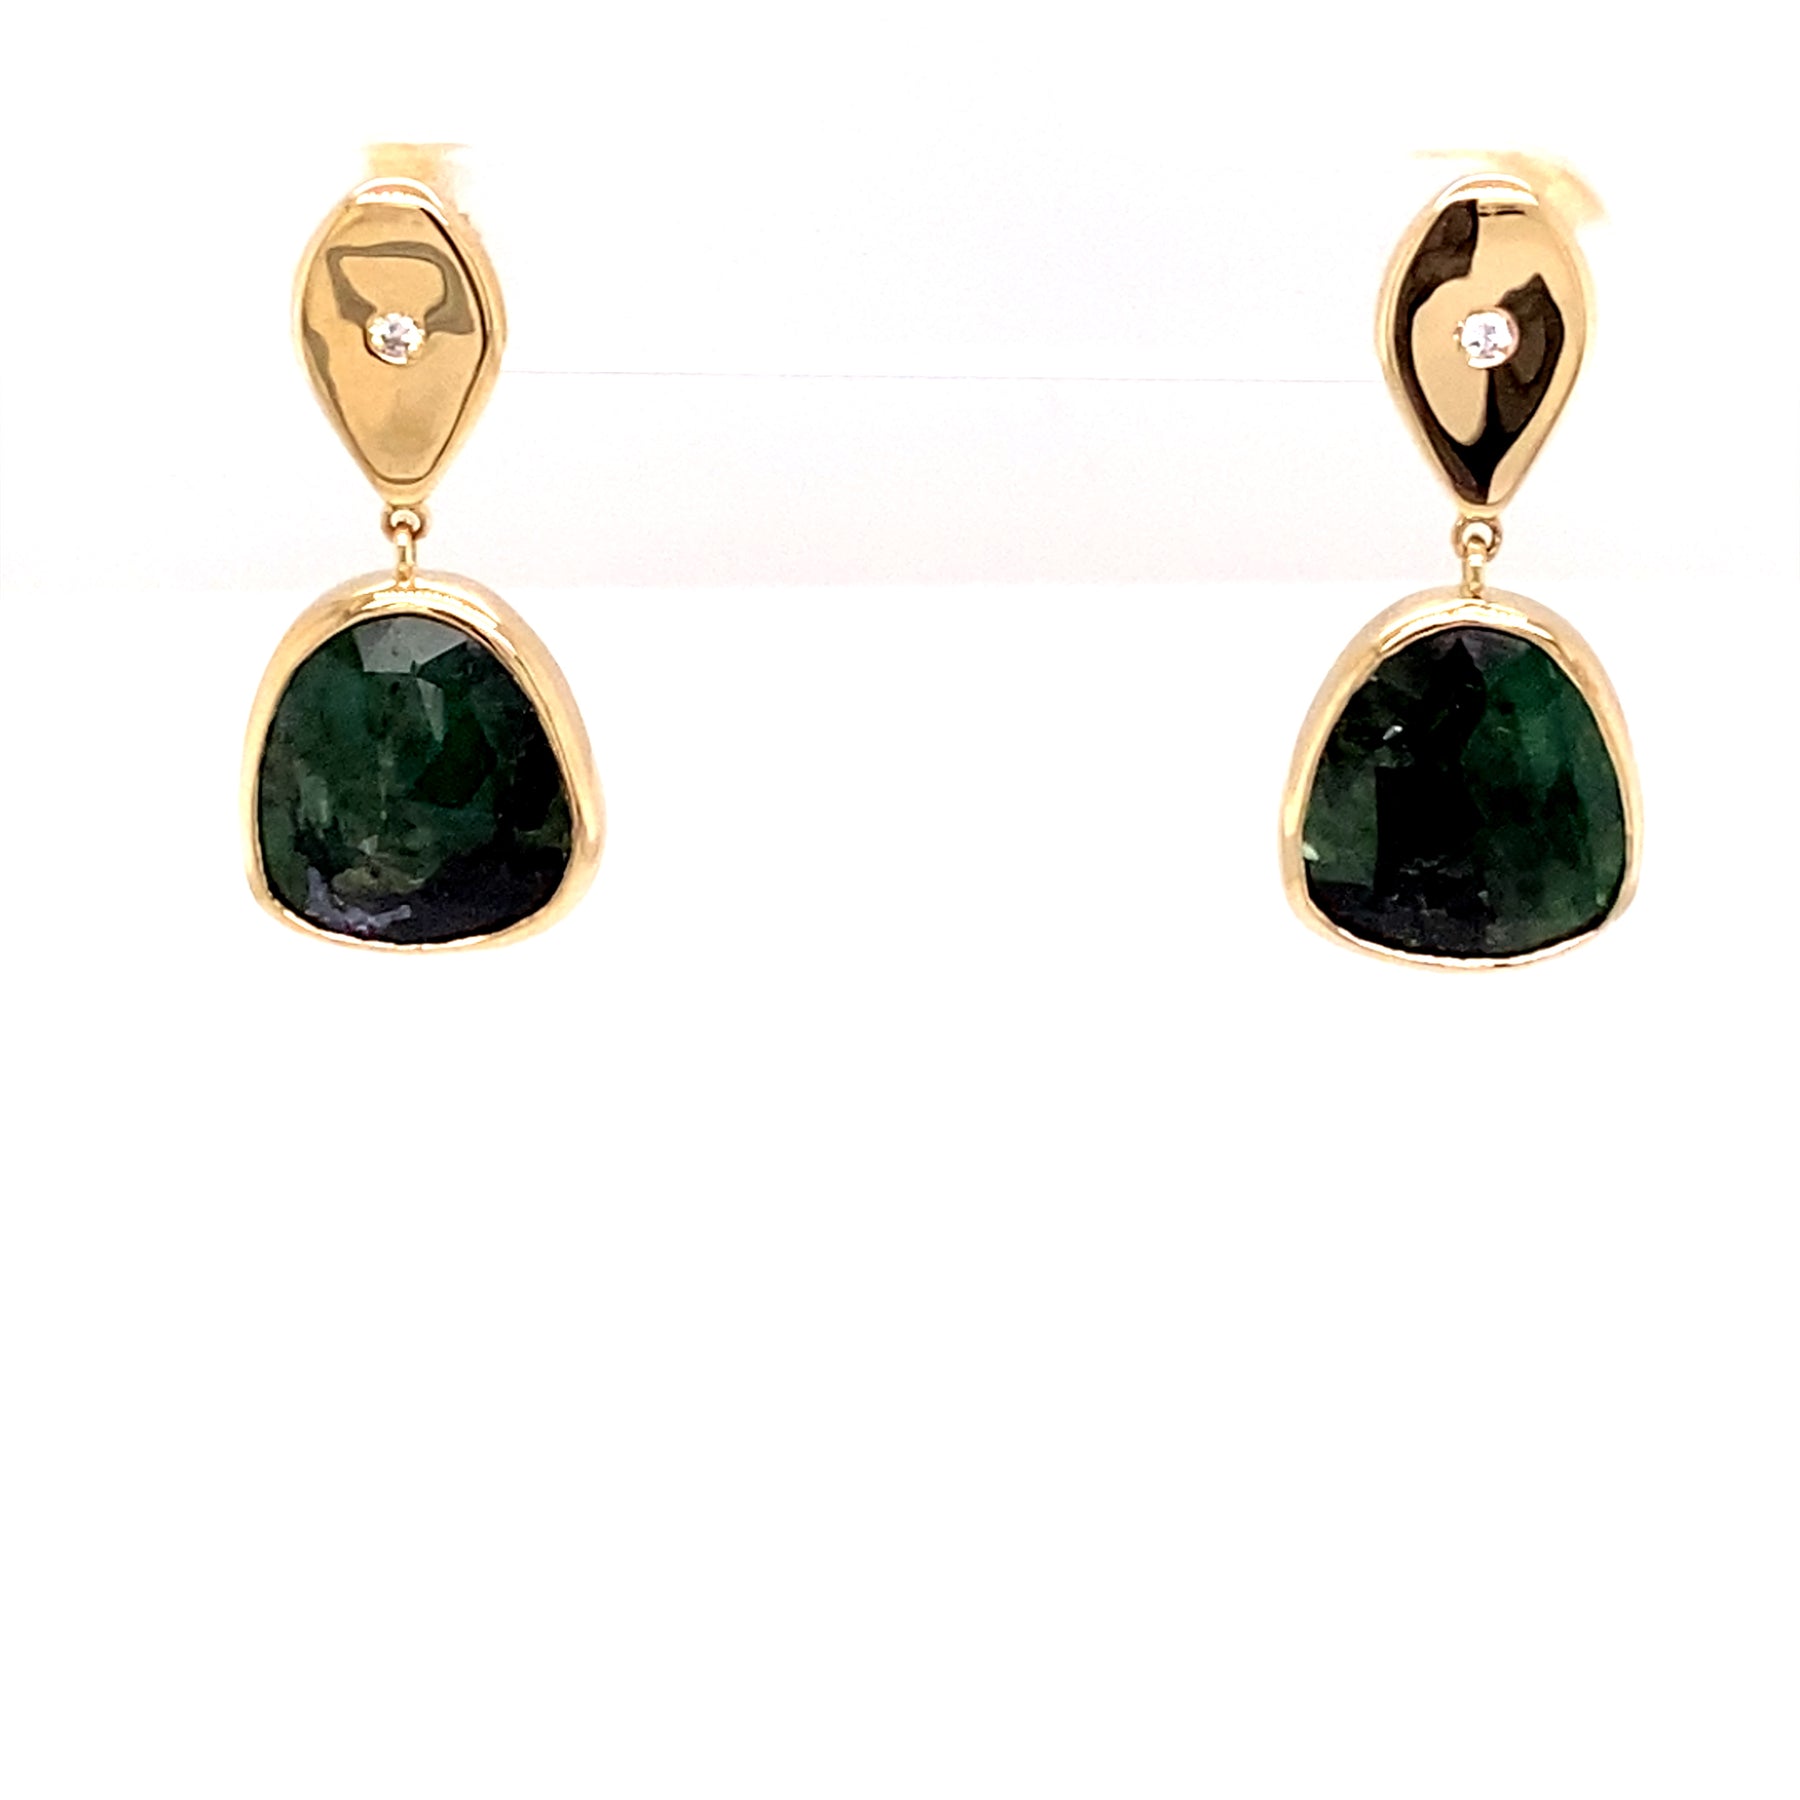 One of a Kind 14K Yellow Gold Teardrop with Natural Emerald Slice Drop Earrings